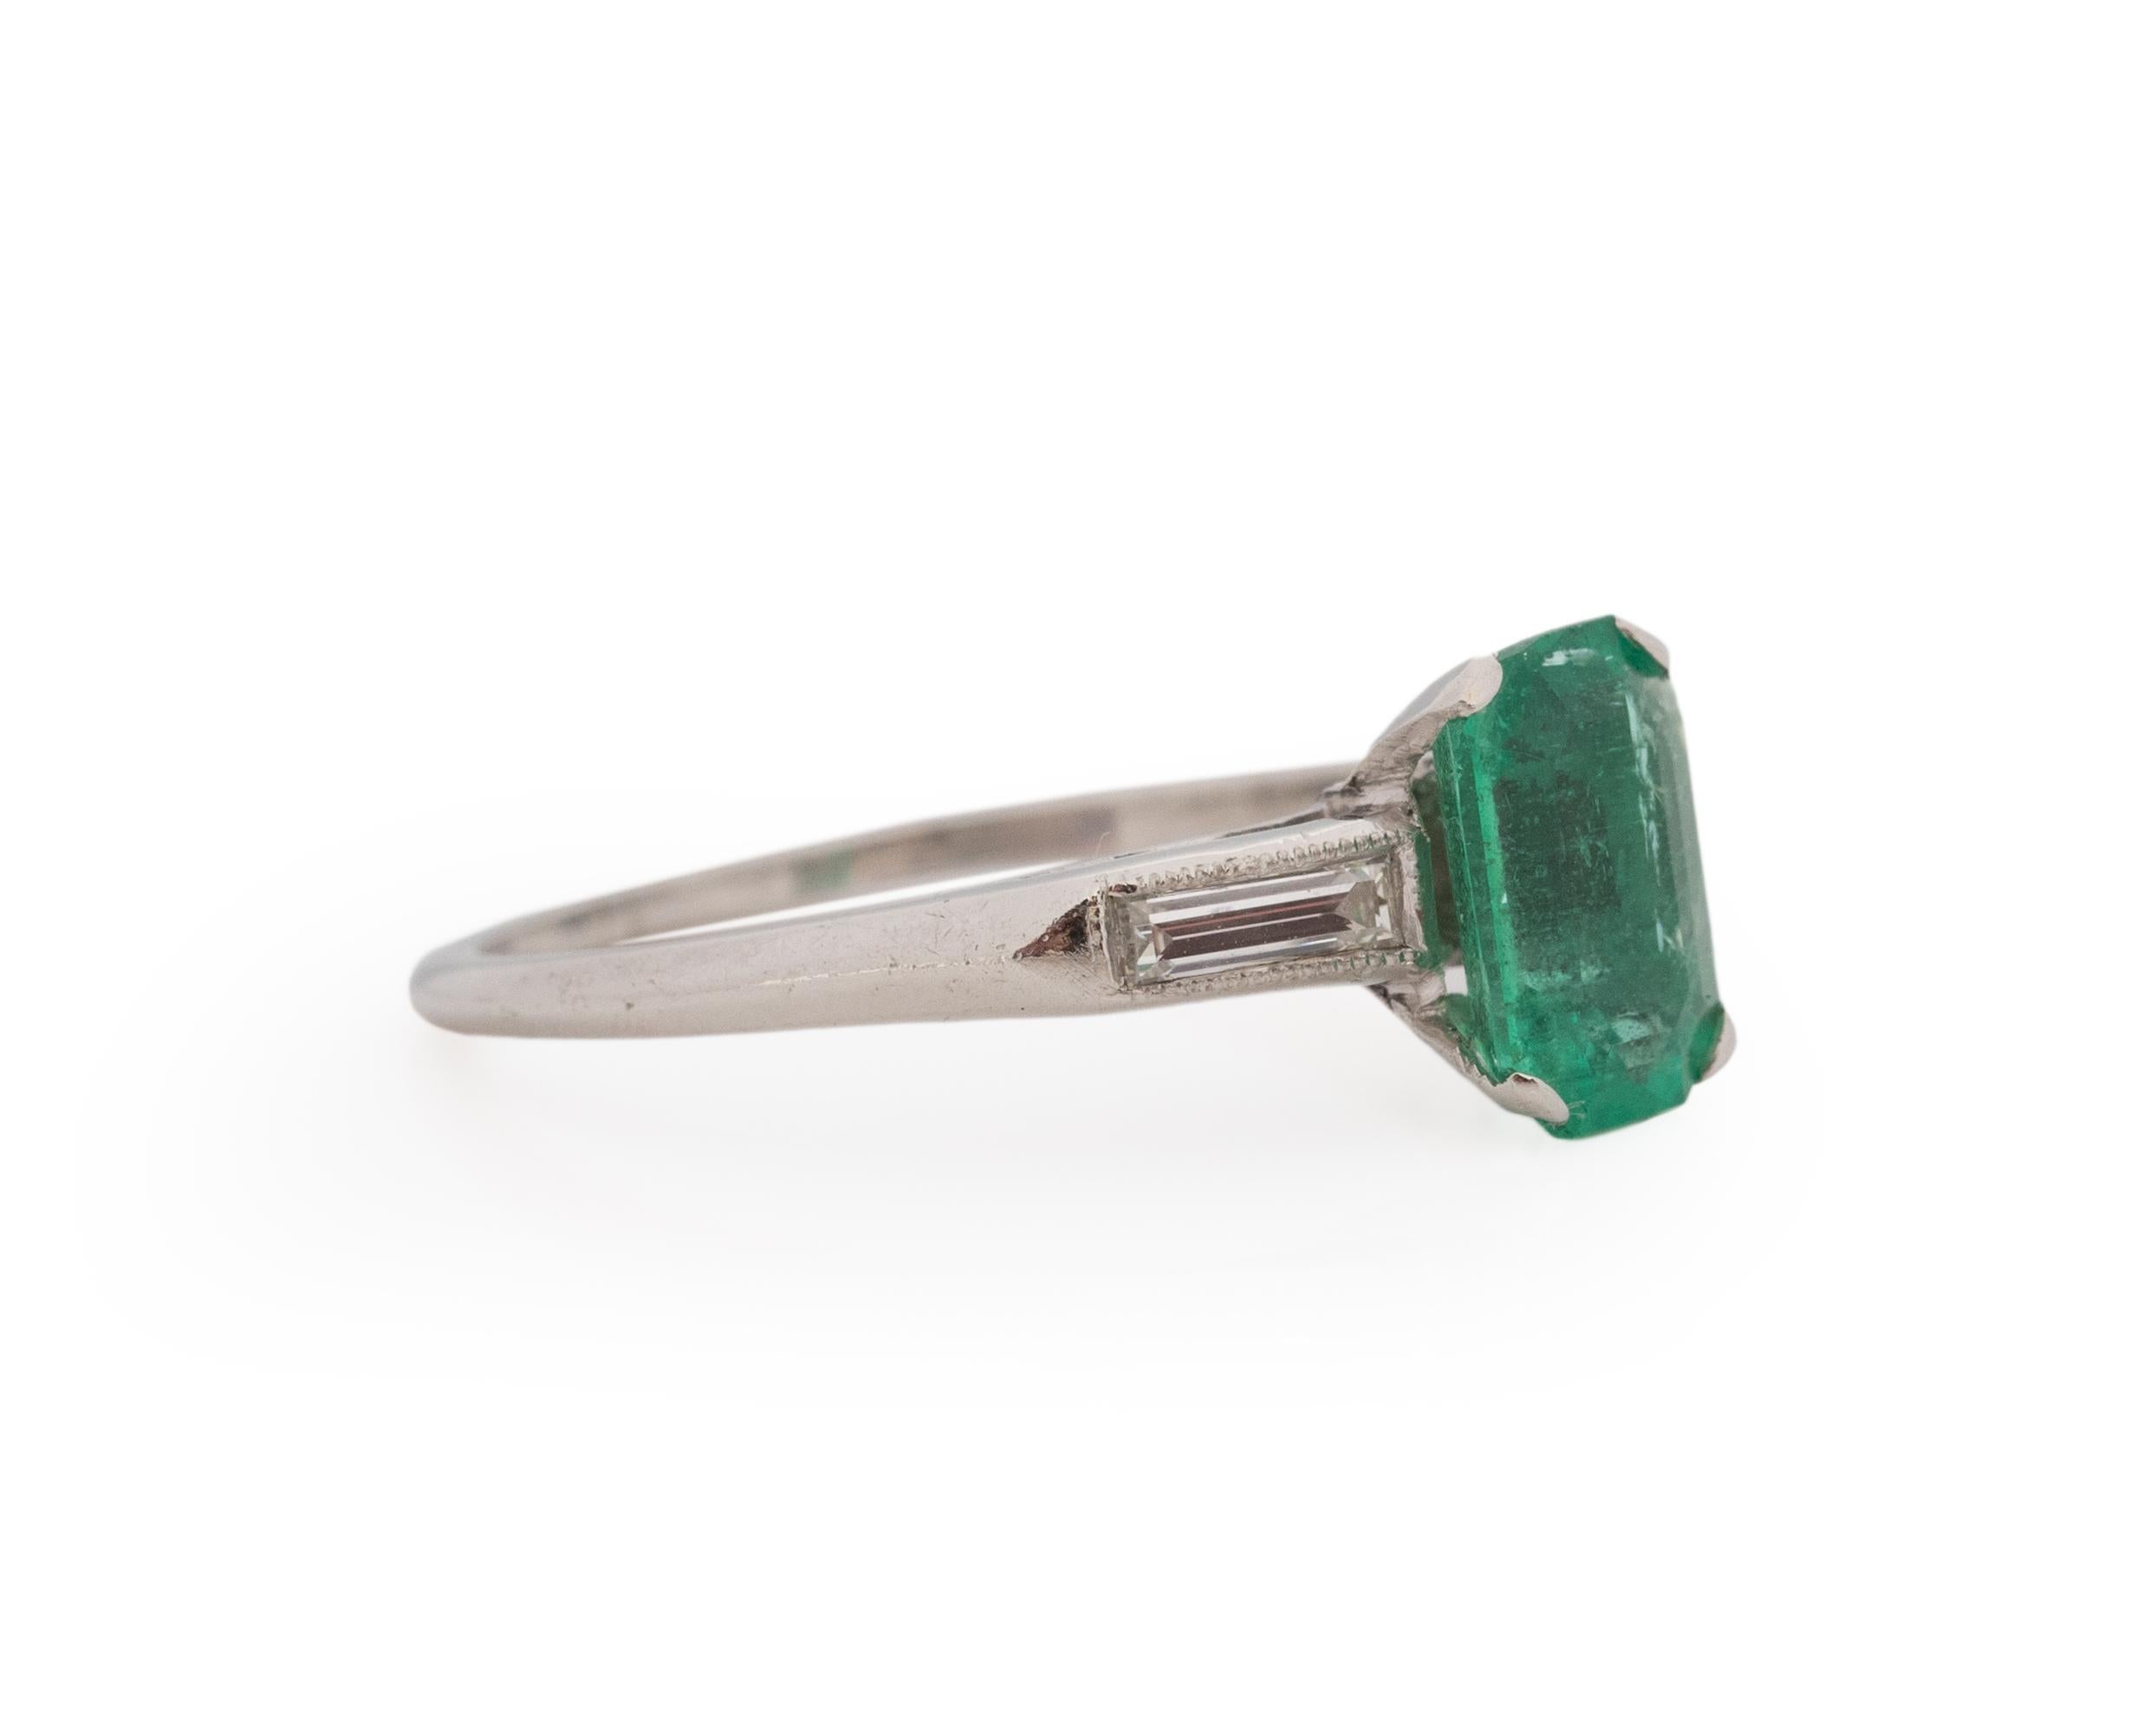 Ring Size: 6.25
Metal Type: Platinum [Hallmarked, and Tested]
Weight: 3.0 grams

Center Stone Details:
Type: Emerald, Natural.
Weight: 1.20ct
Cut: Emerald Cut
Color: Green:

Side Stone Details:
Weight: .25ct, total
Cut: Antique Straight